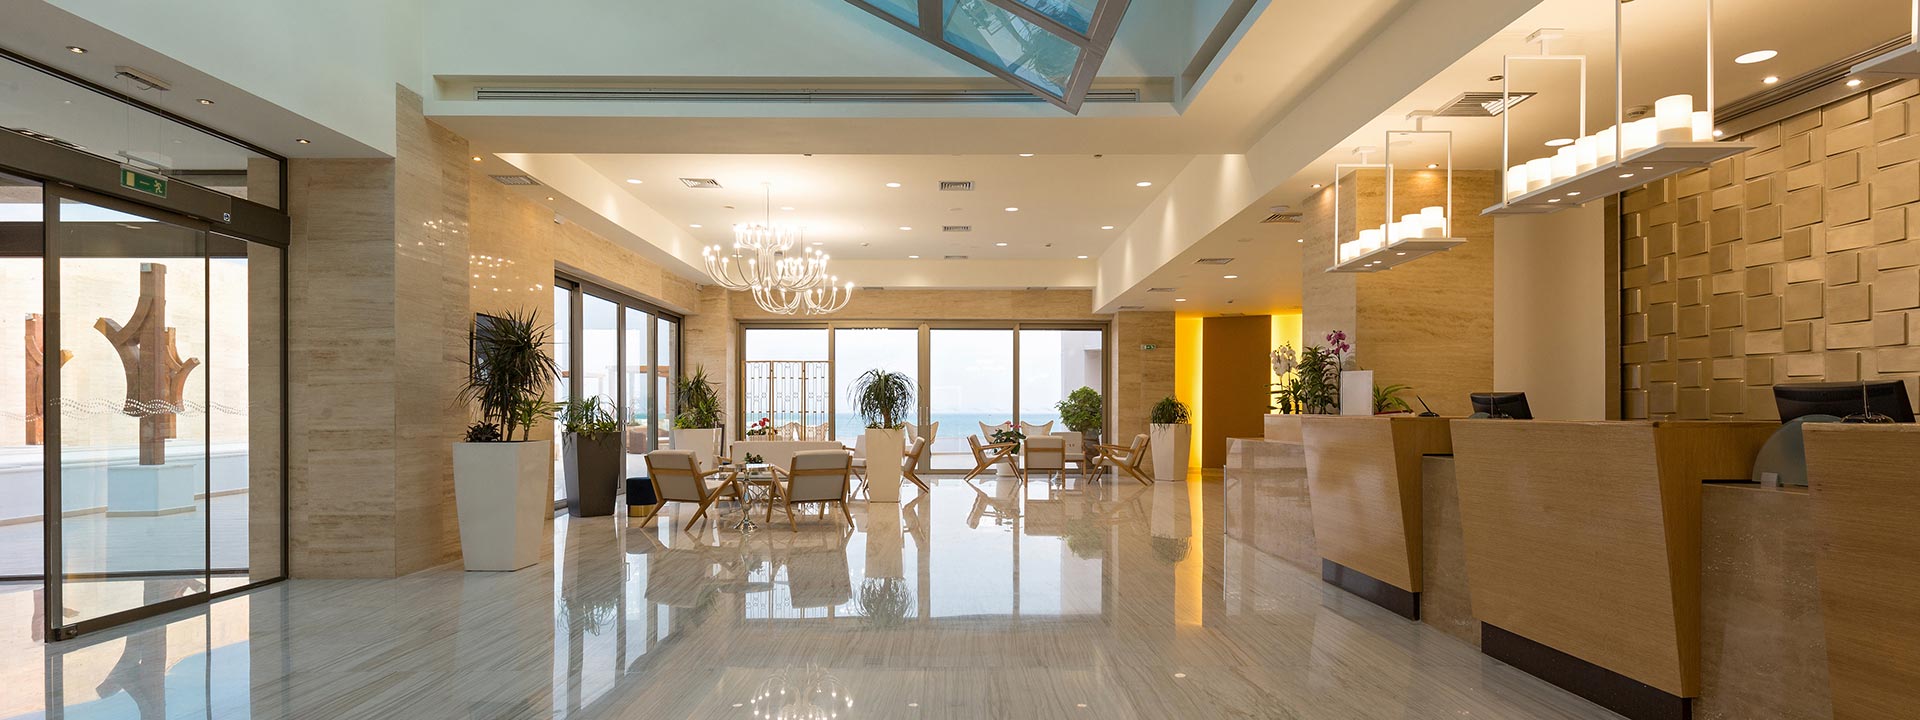 5 Reasons Why Your Hotel’s Lobby Design is Crucial